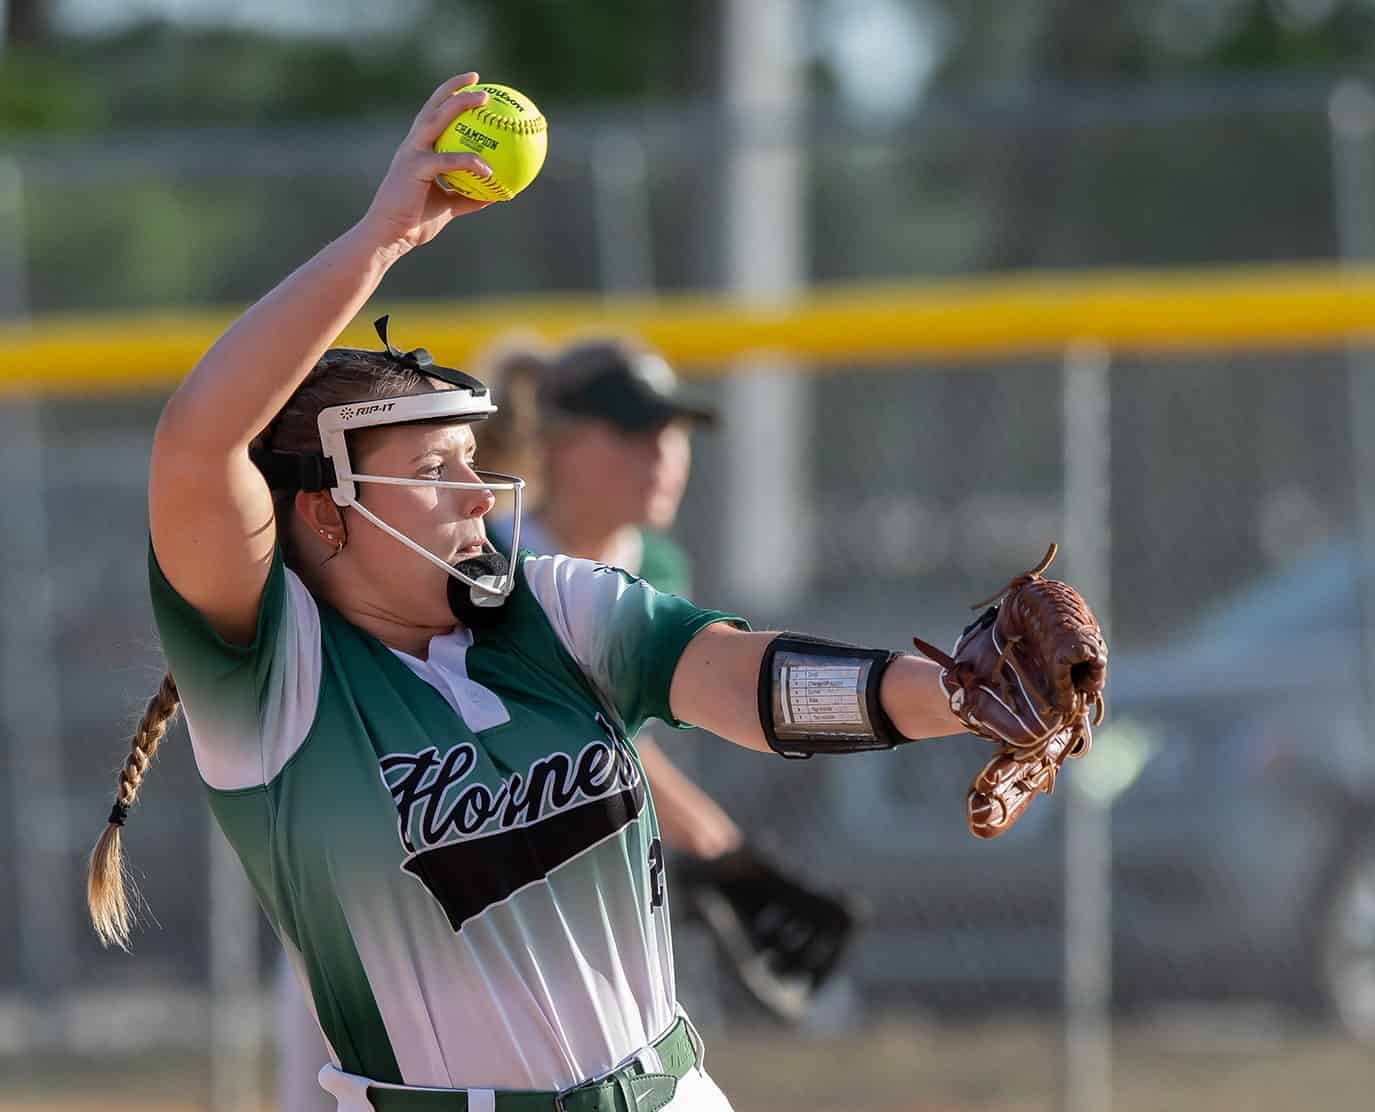 Weeki Wachee High’s Bre Slater winds into a delivery in the home 4A District 5 playoff game against Central High . Photo by [Joseph Dicristofalo]